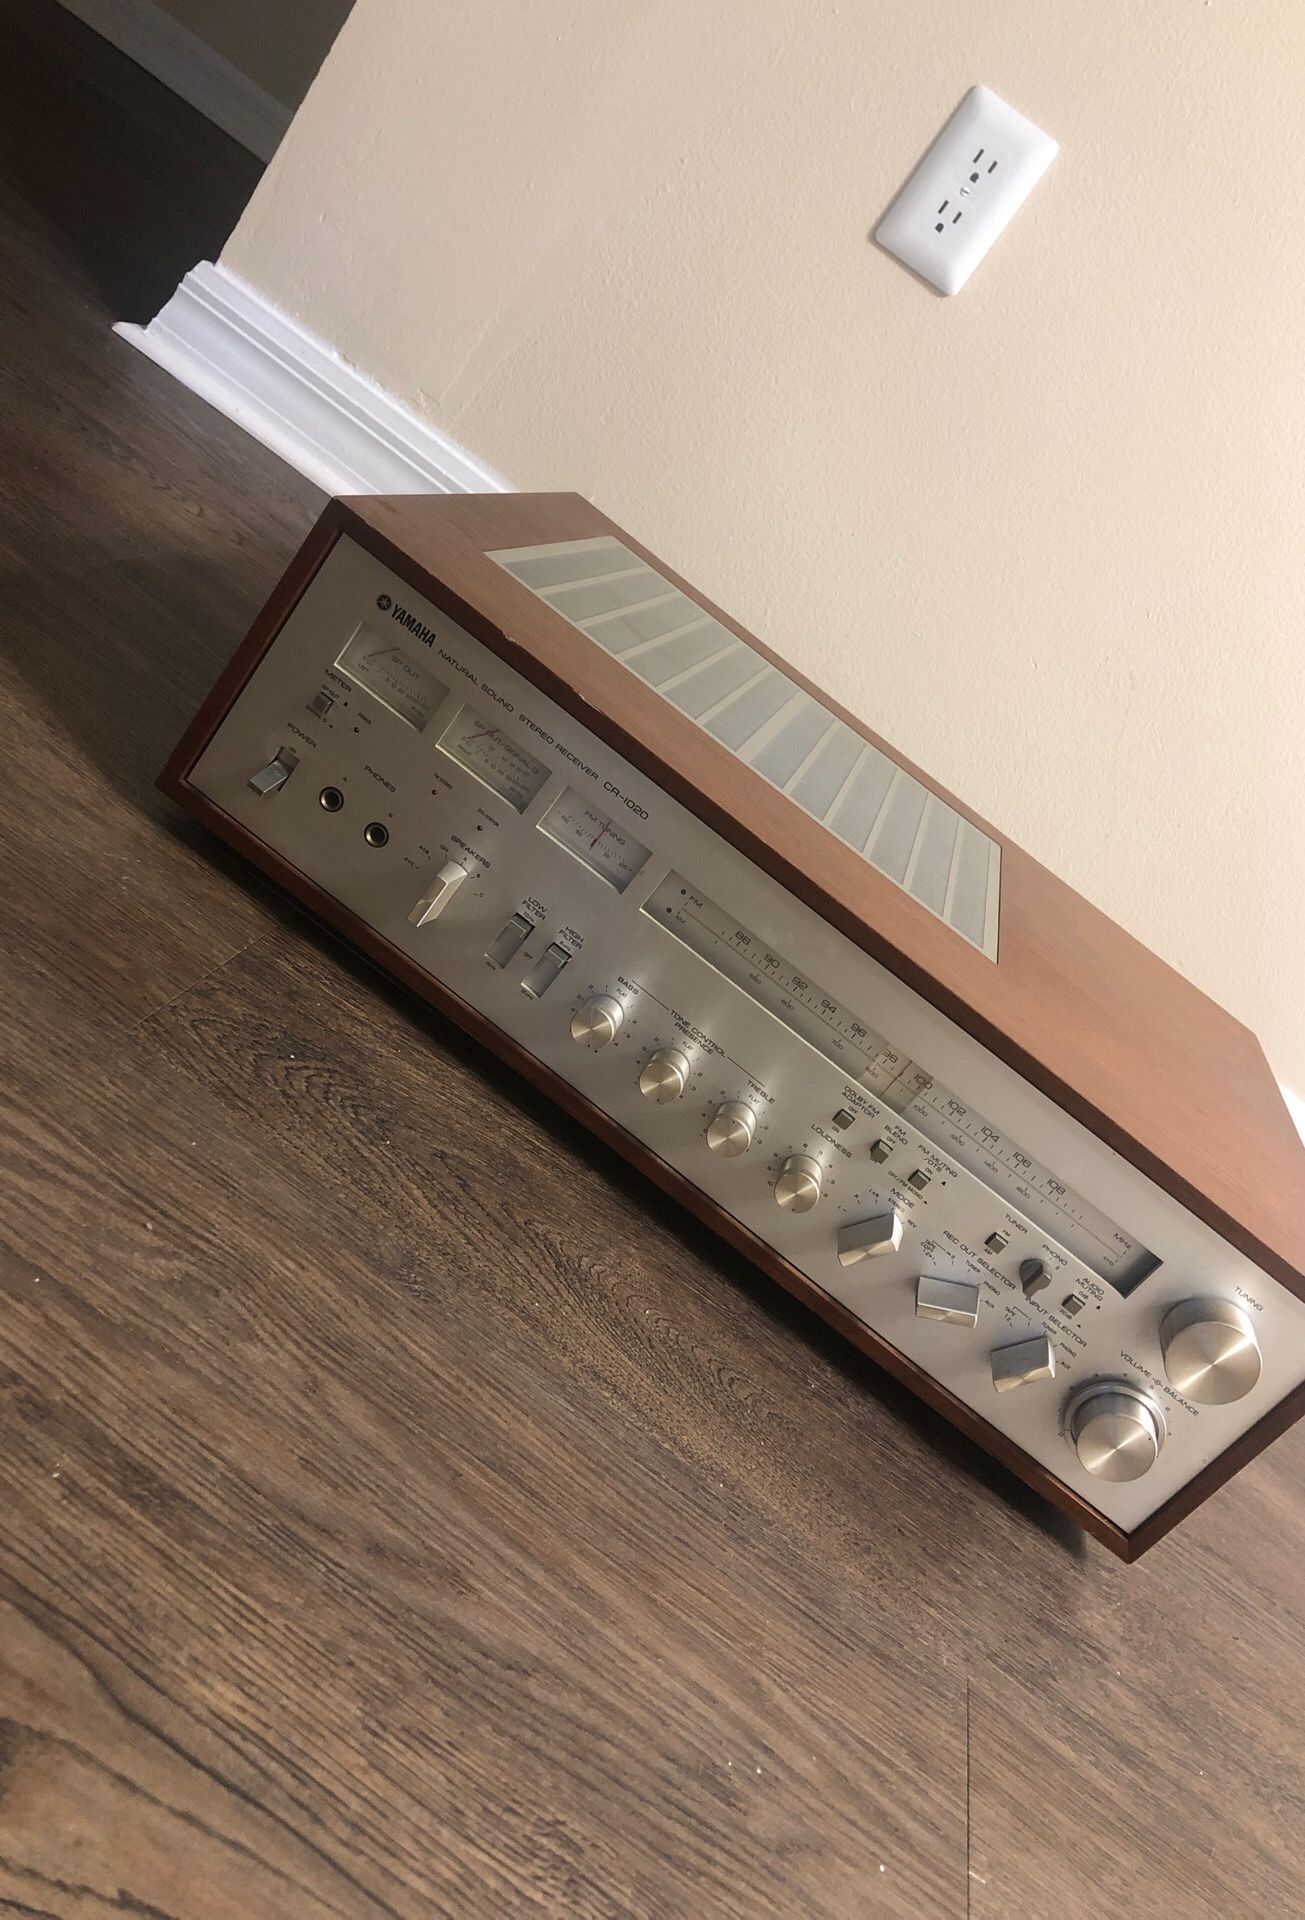 Yamaha Natural Sound Stereo Receiver CR-1020